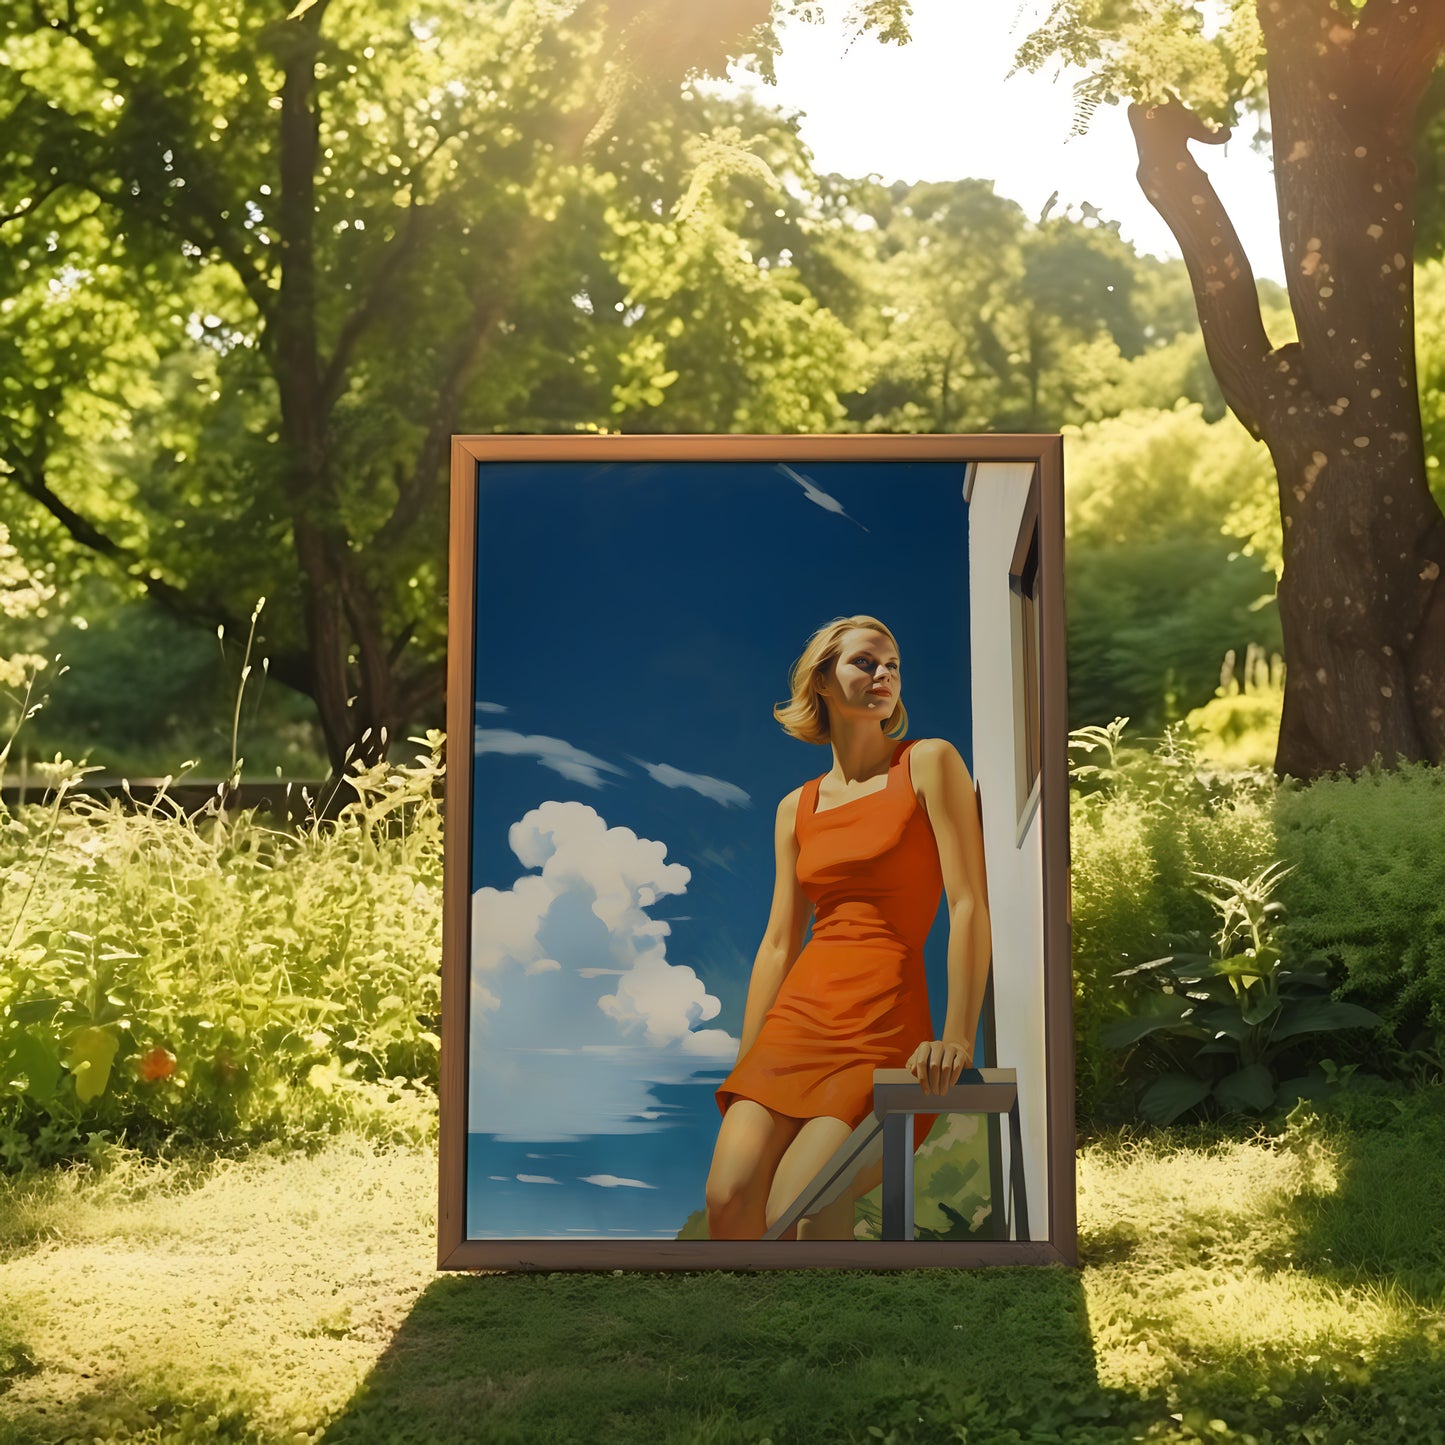 A woman stepping out of a picture frame into a sunny garden.